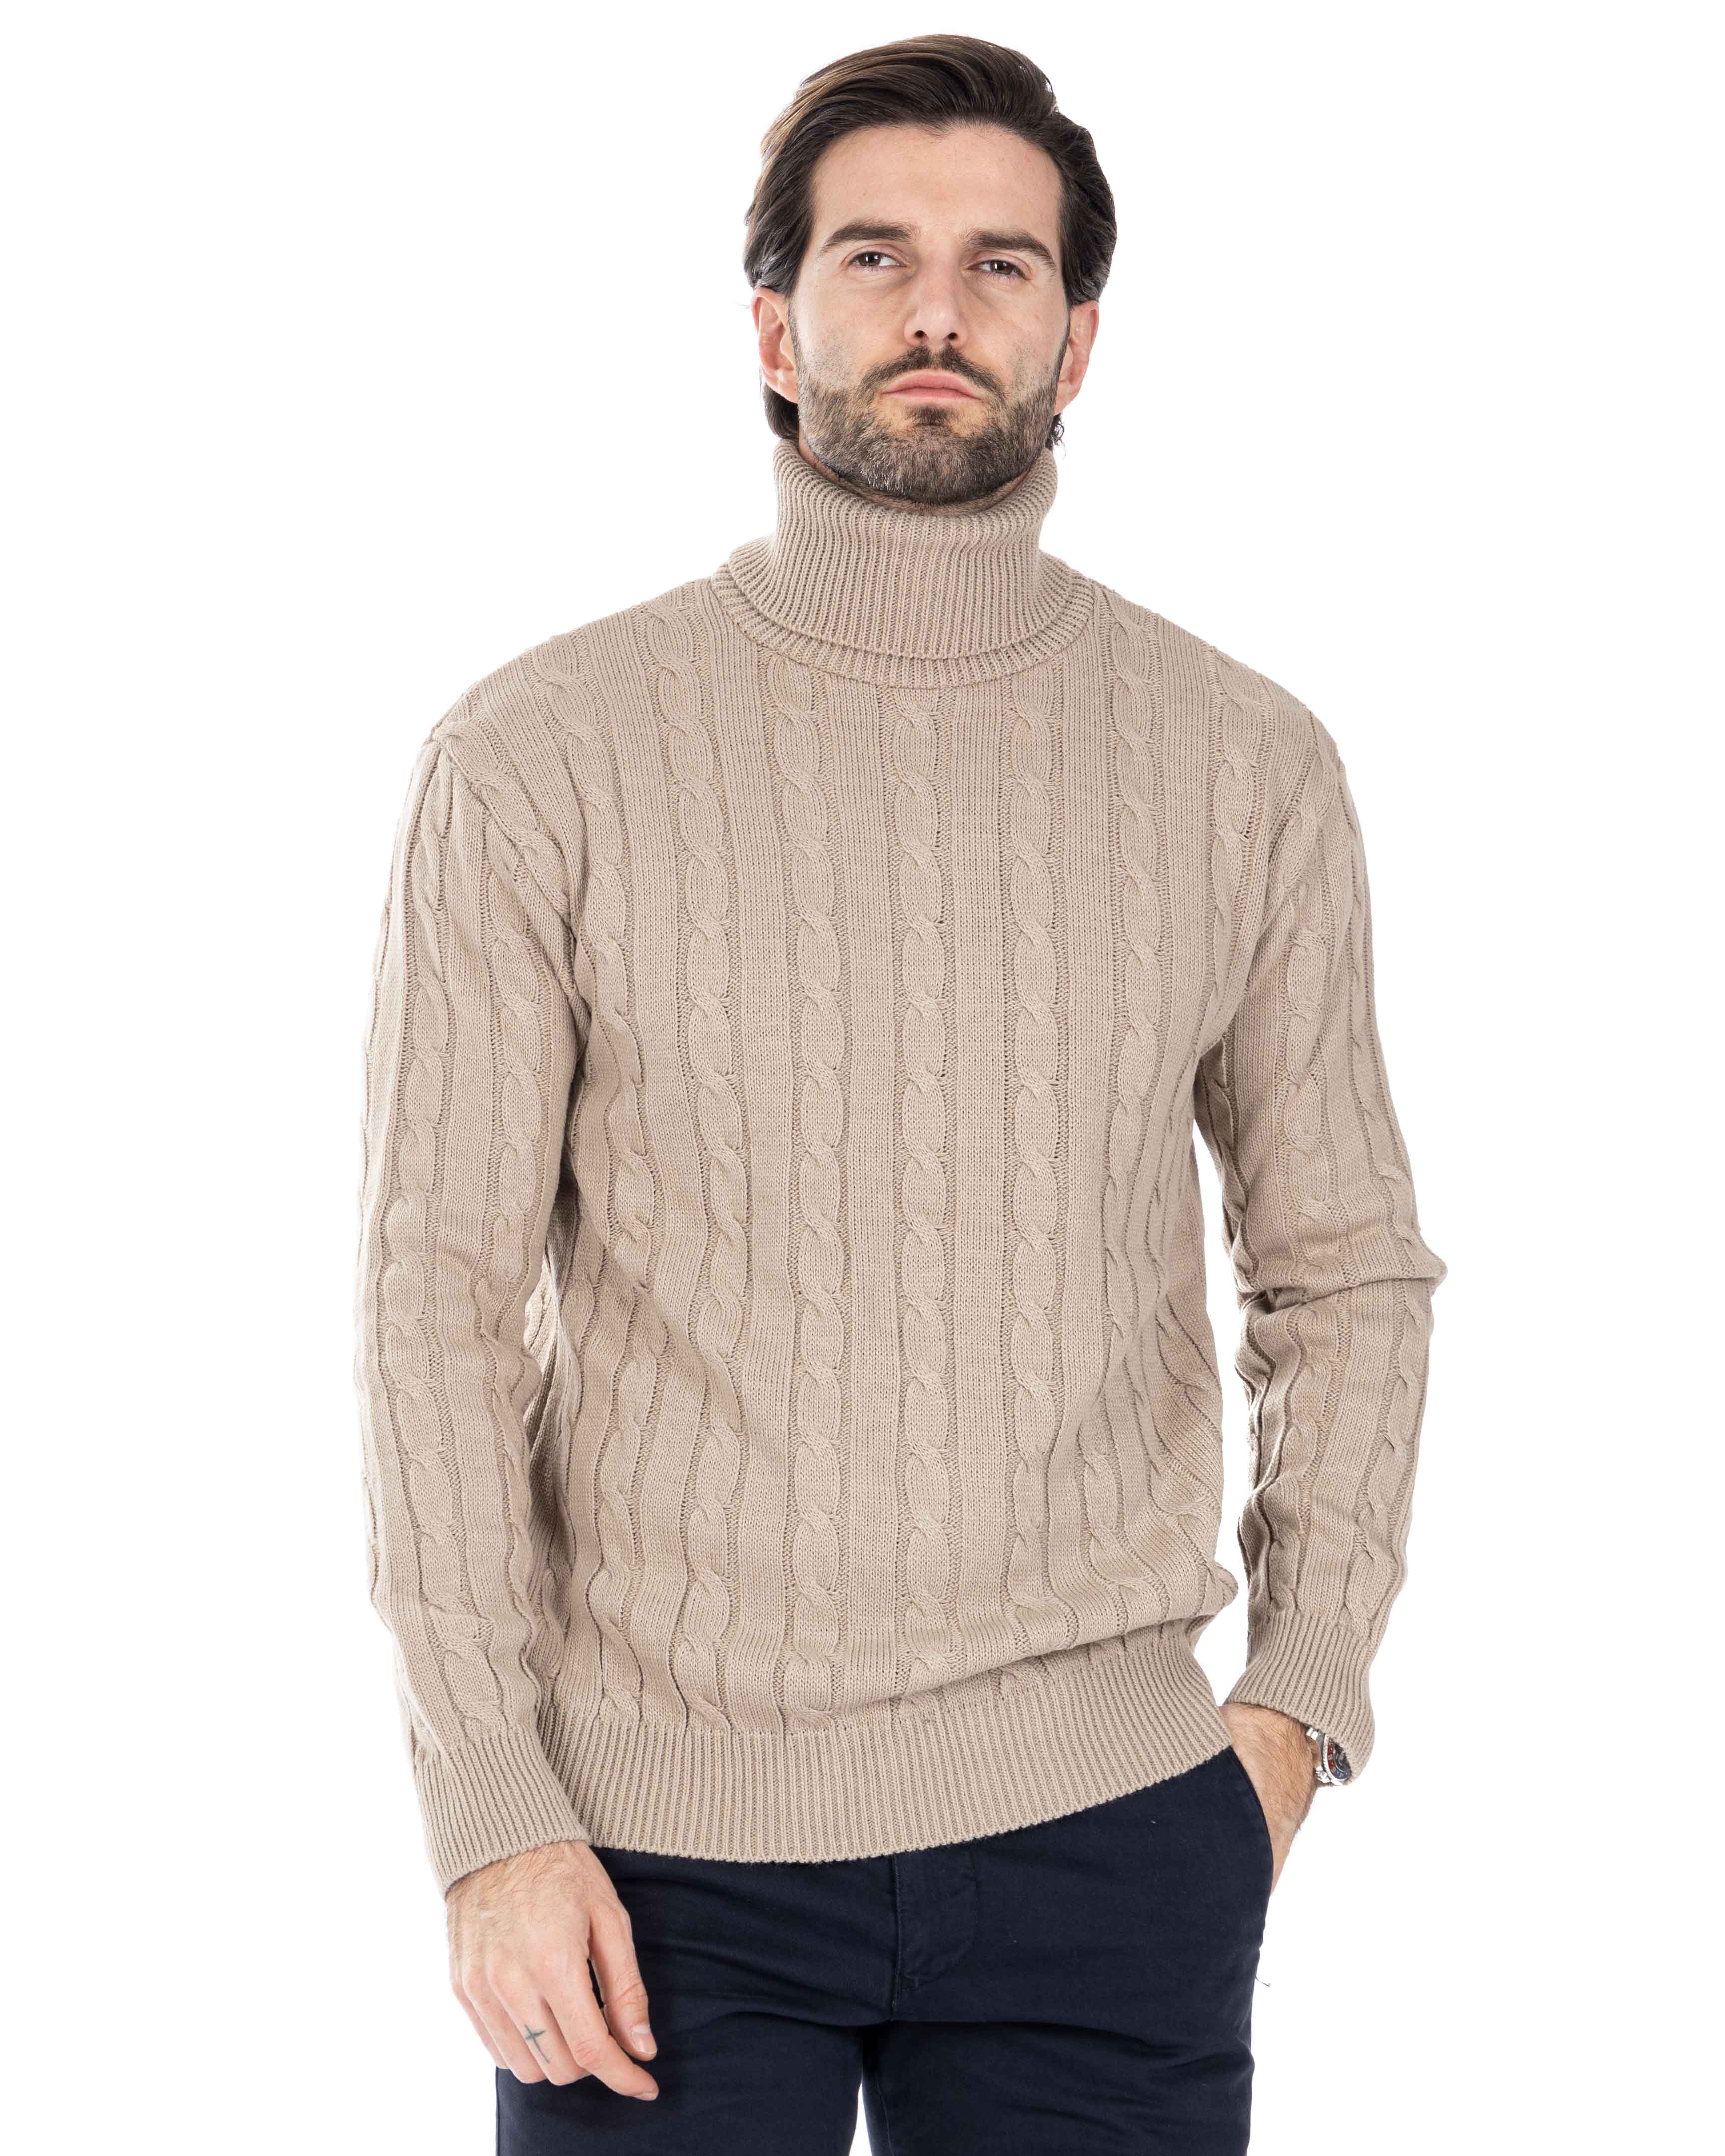 Crovie - beige sweater with high neck cables